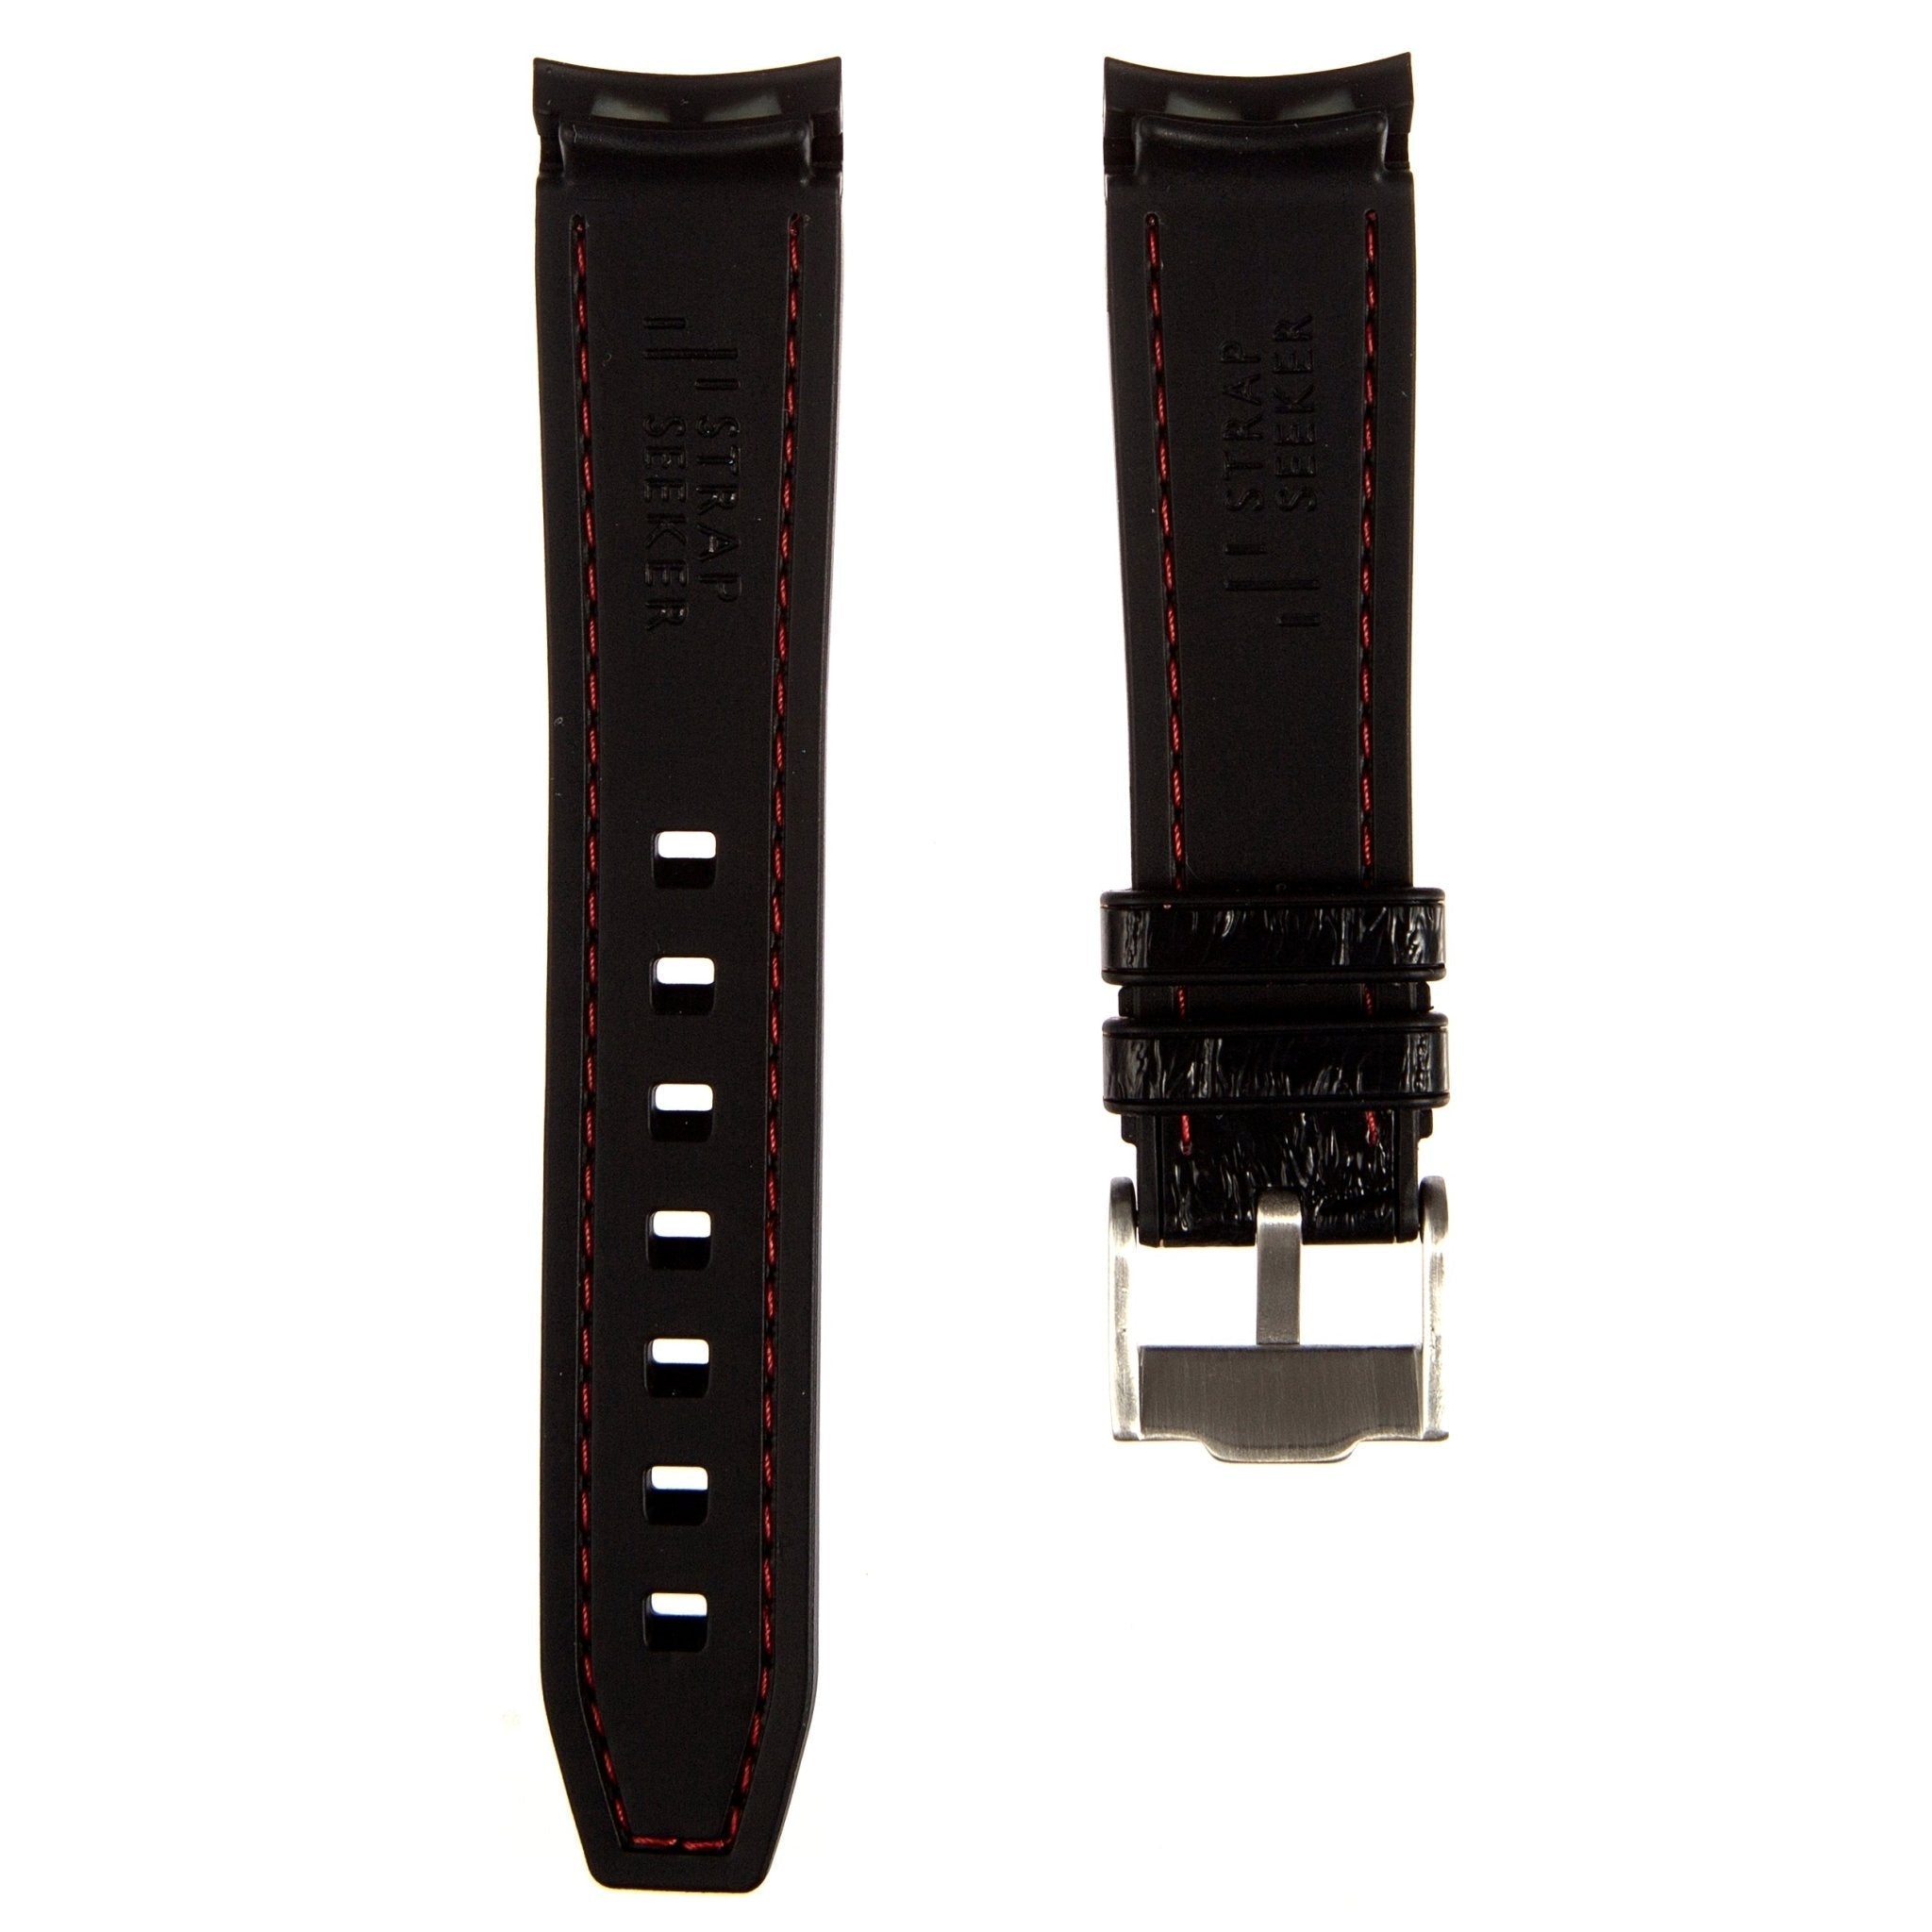 Alligator Embossed Curved End Premium Silicone Strap - Compatible with Rolex Submariner - Black with Red Stitch (2406) -StrapSeeker